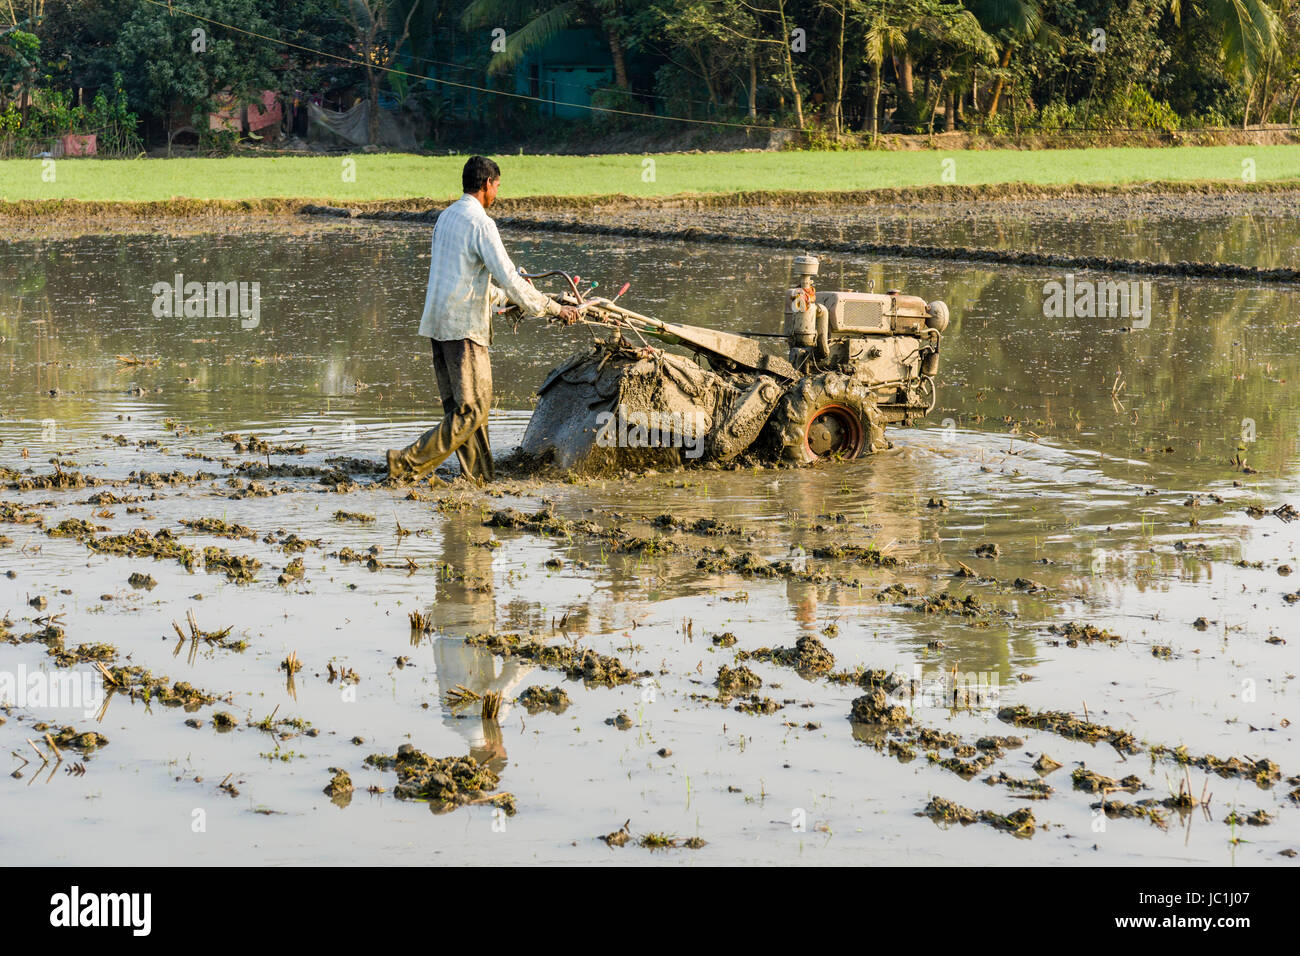 A farmer is working on a rice field with a rotary cultivator in the rural surroundings of the suburb New Town Stock Photo